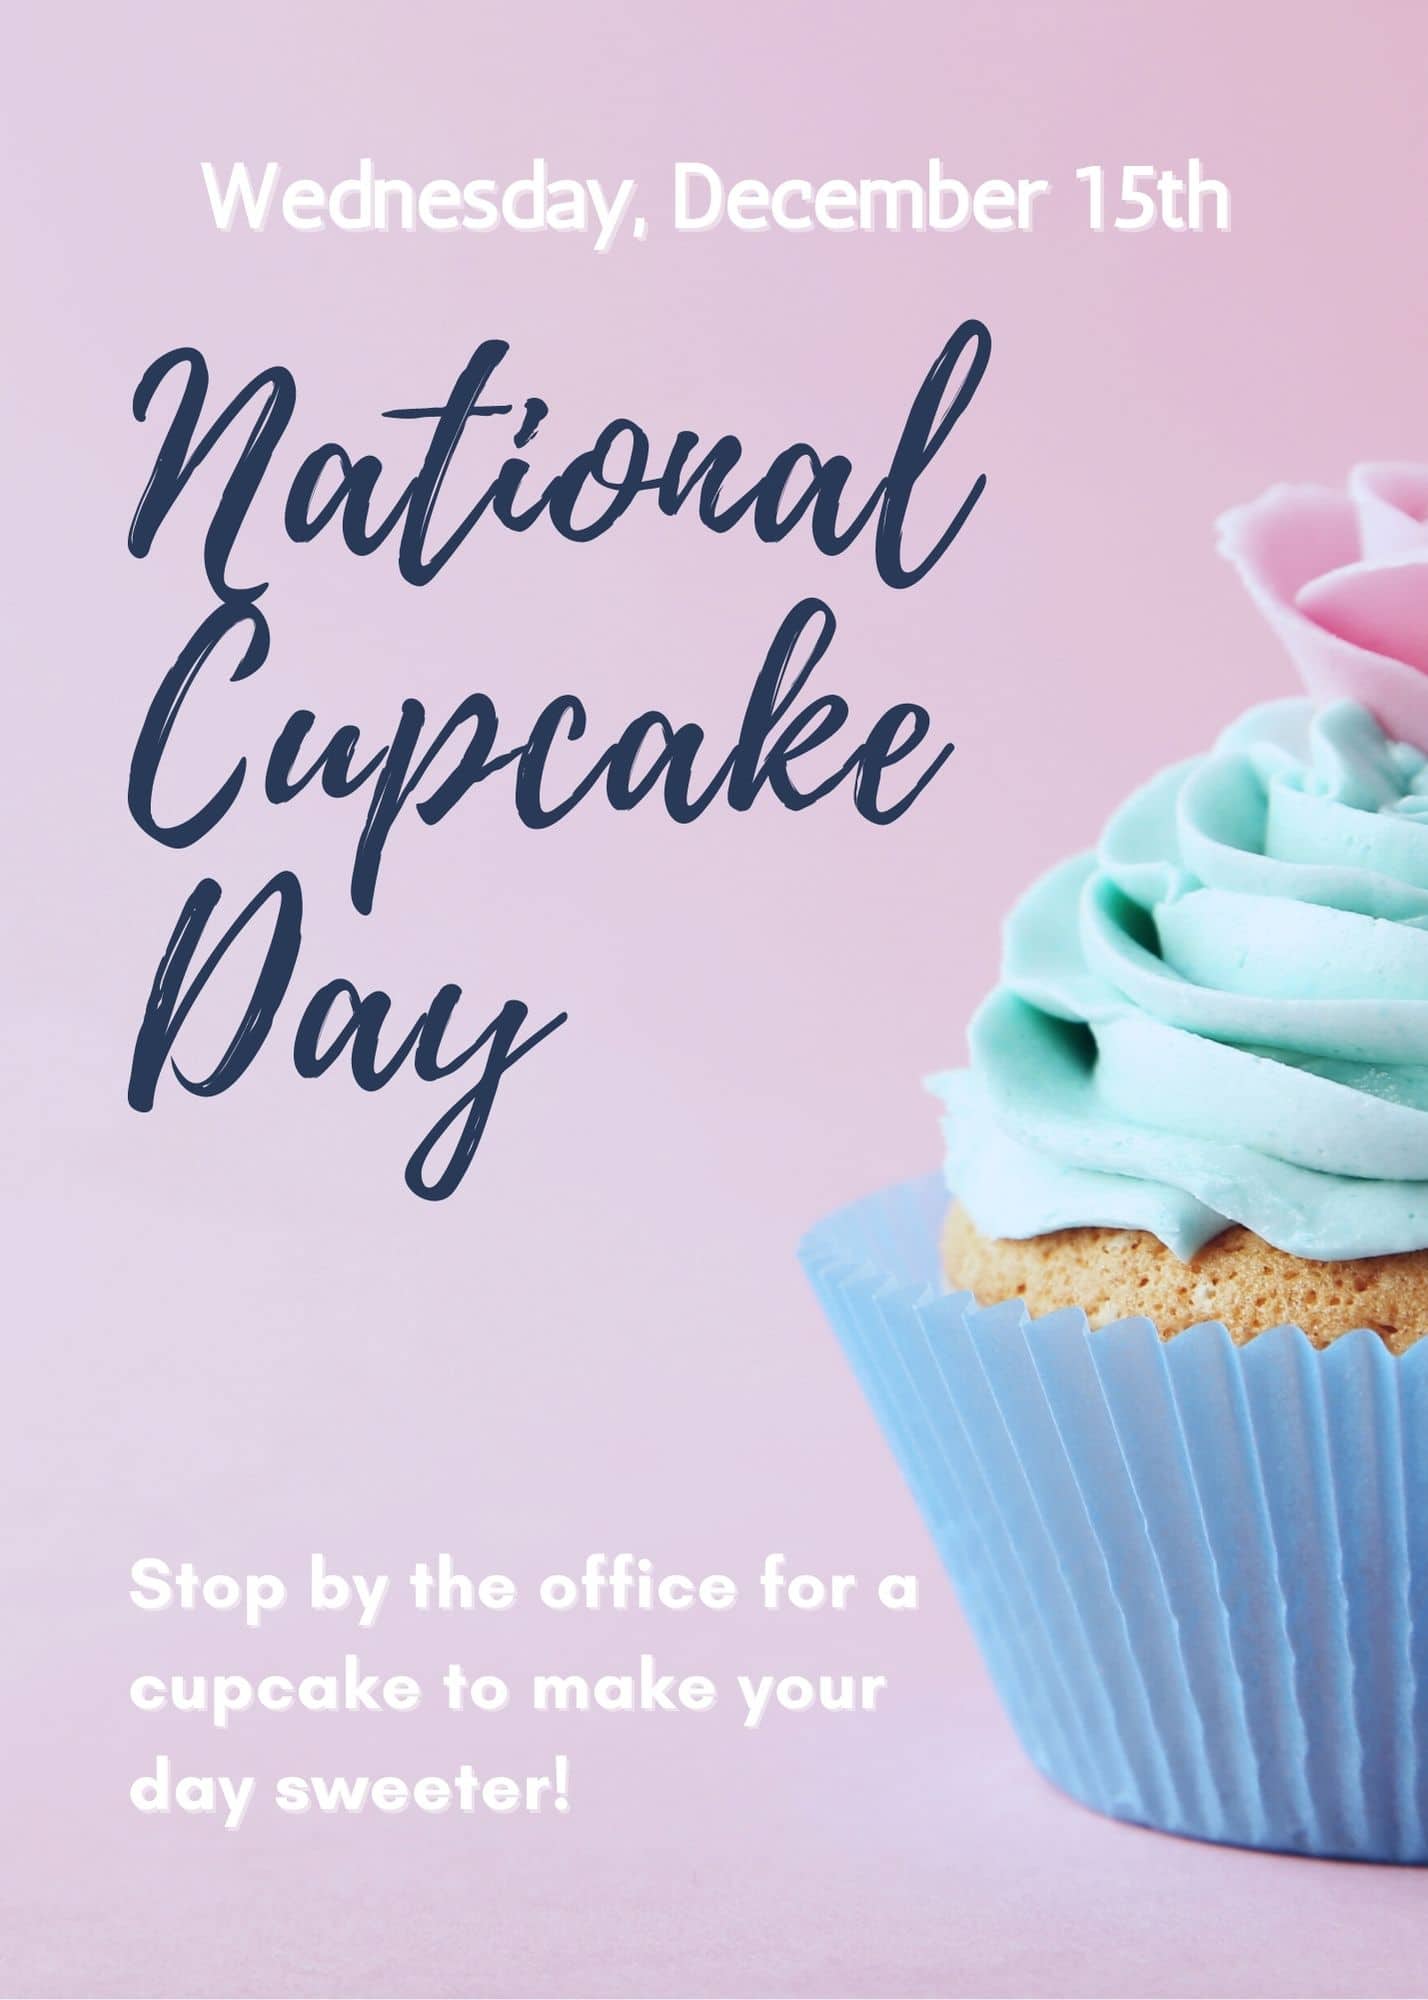 National cupcake day flyer featuring apartments for rent in The Woodlands, TX.